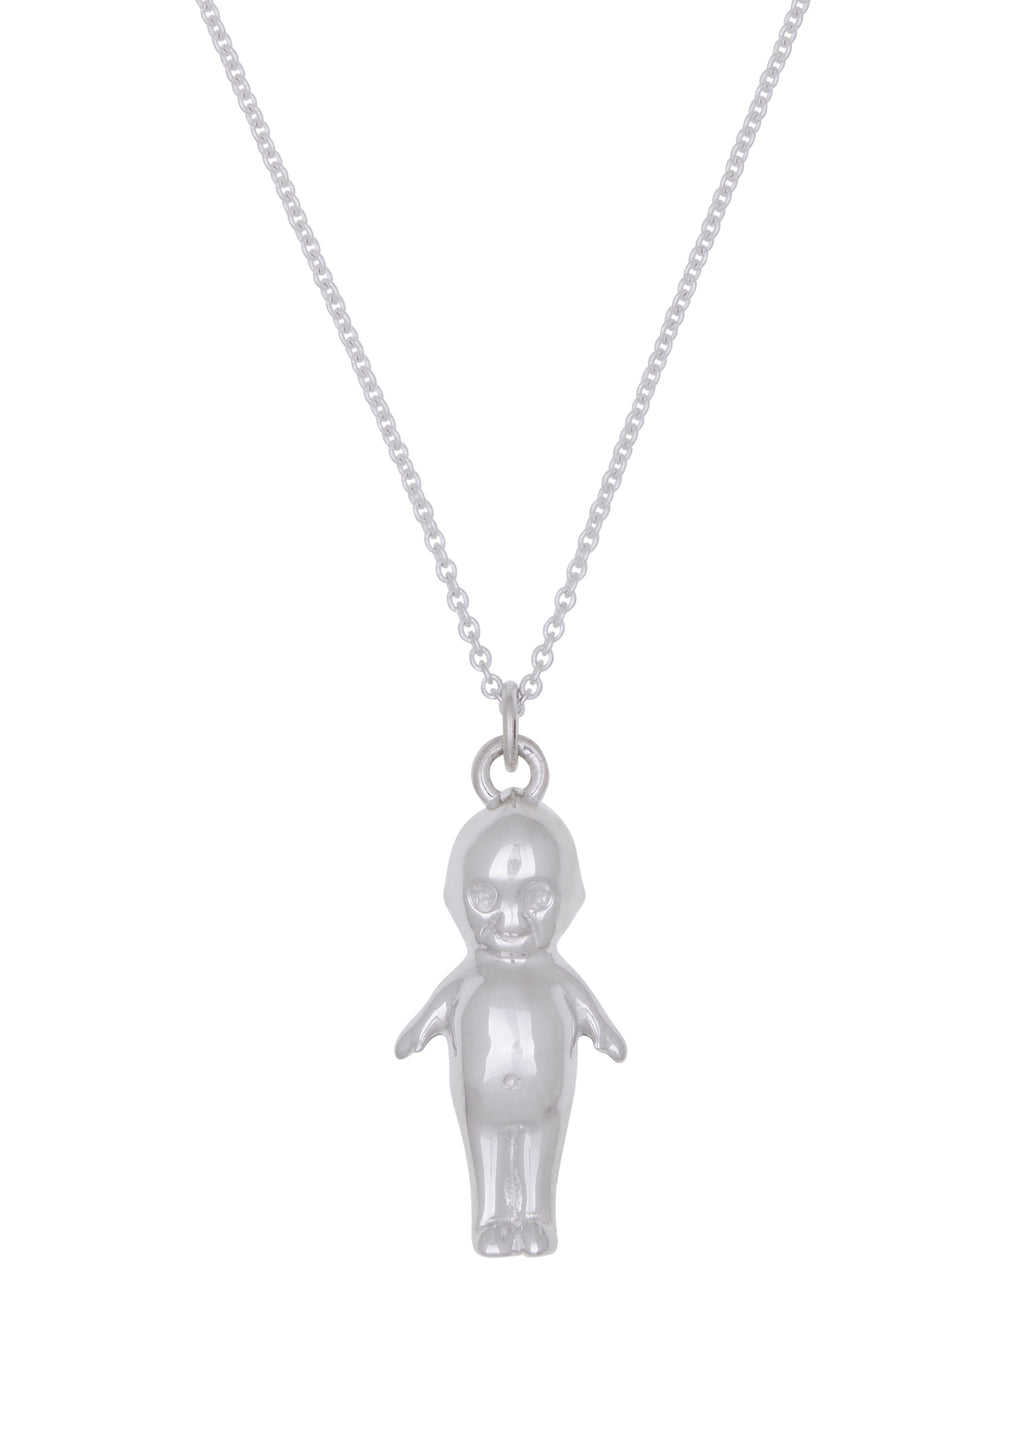 Baby Necklace in Silver